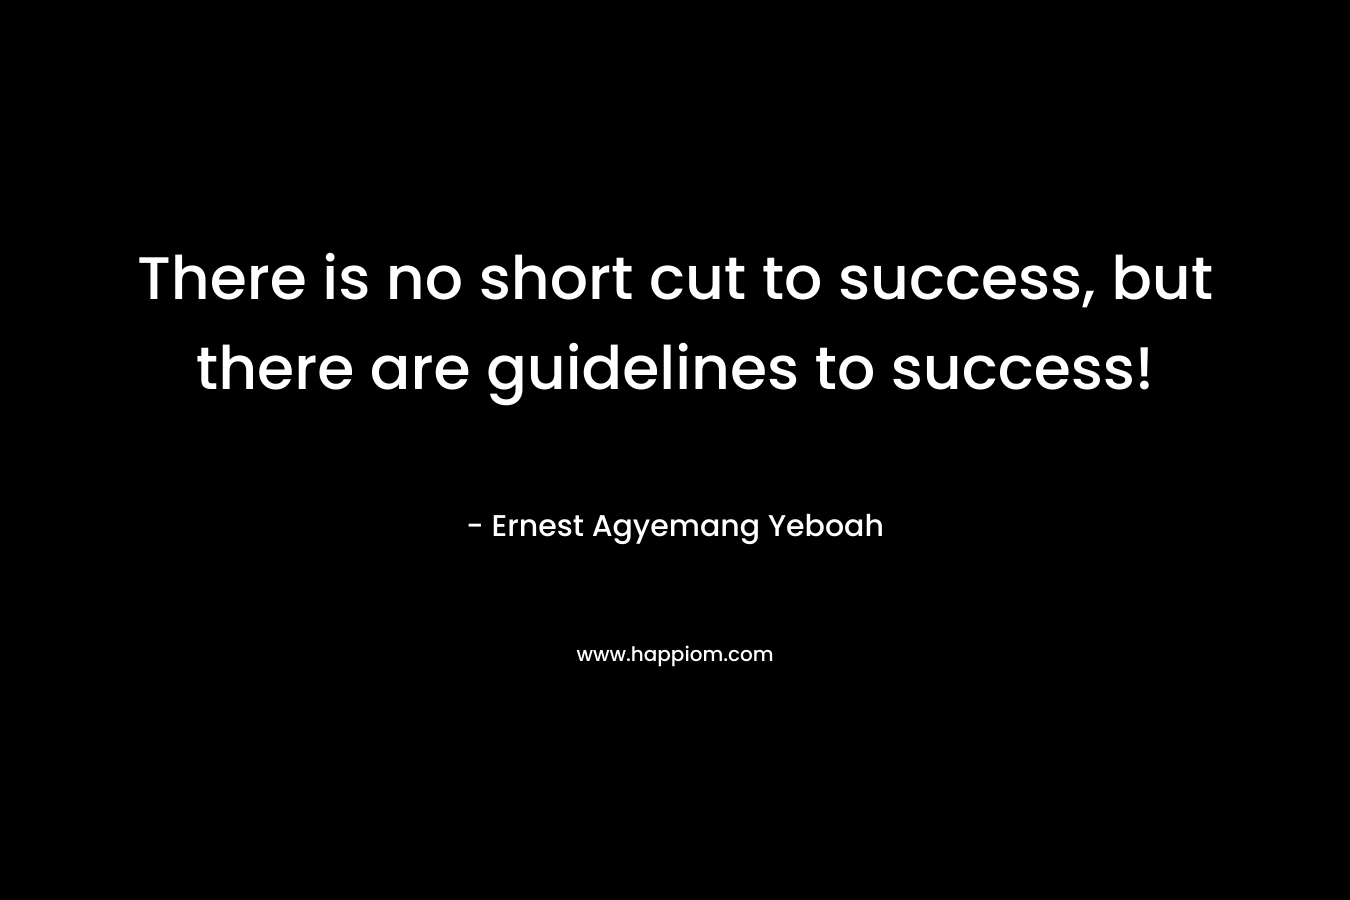 There is no short cut to success, but there are guidelines to success!